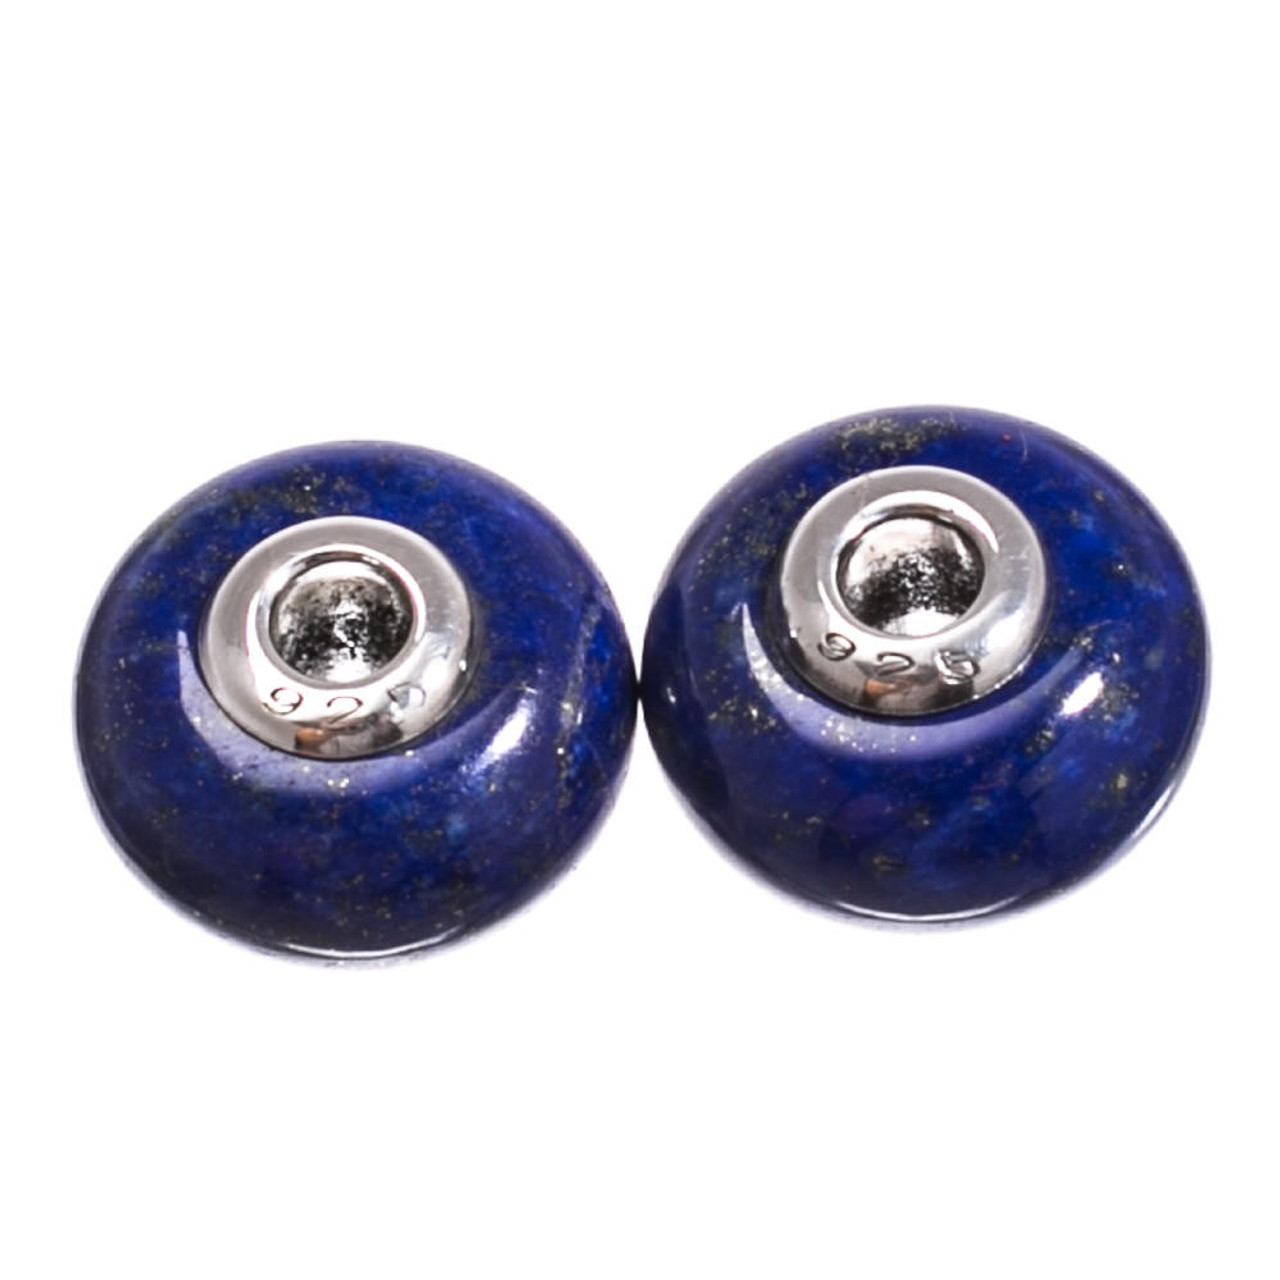 Beads Lapis & Sterling Silver Bead- 2 pc-9x14mm LPS14b 